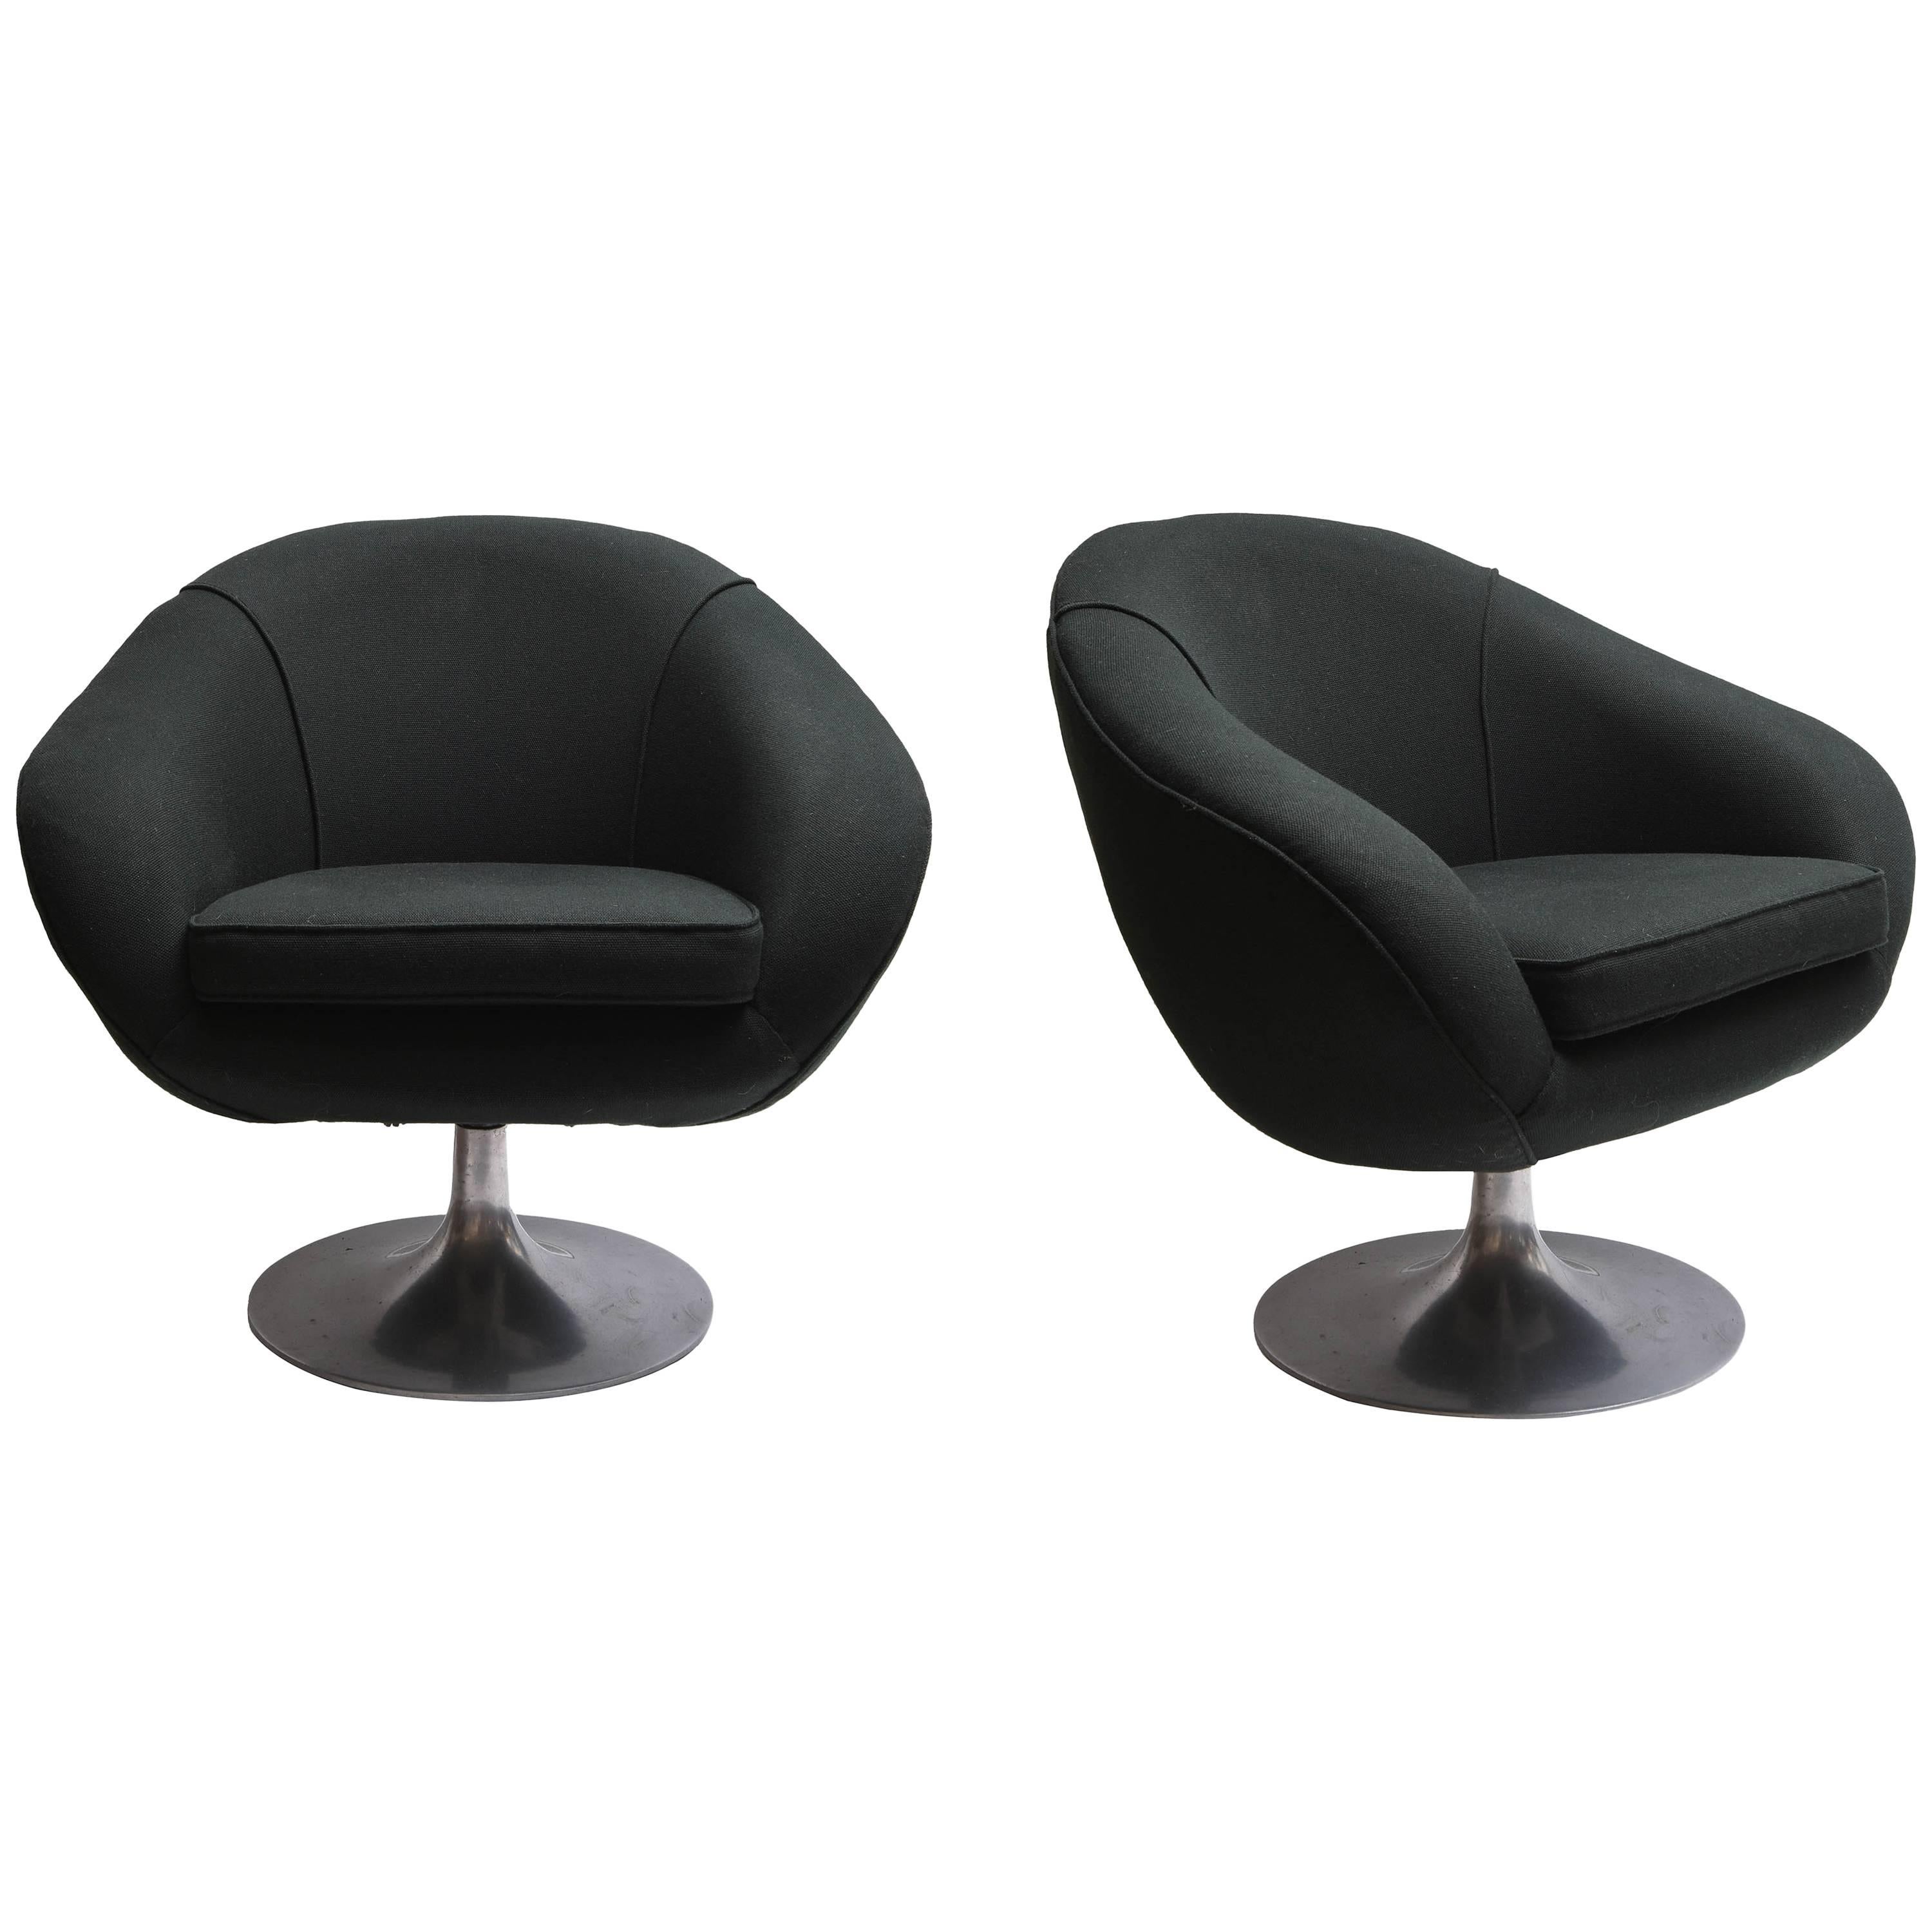 Pair of Black Swivel Chairs For Sale